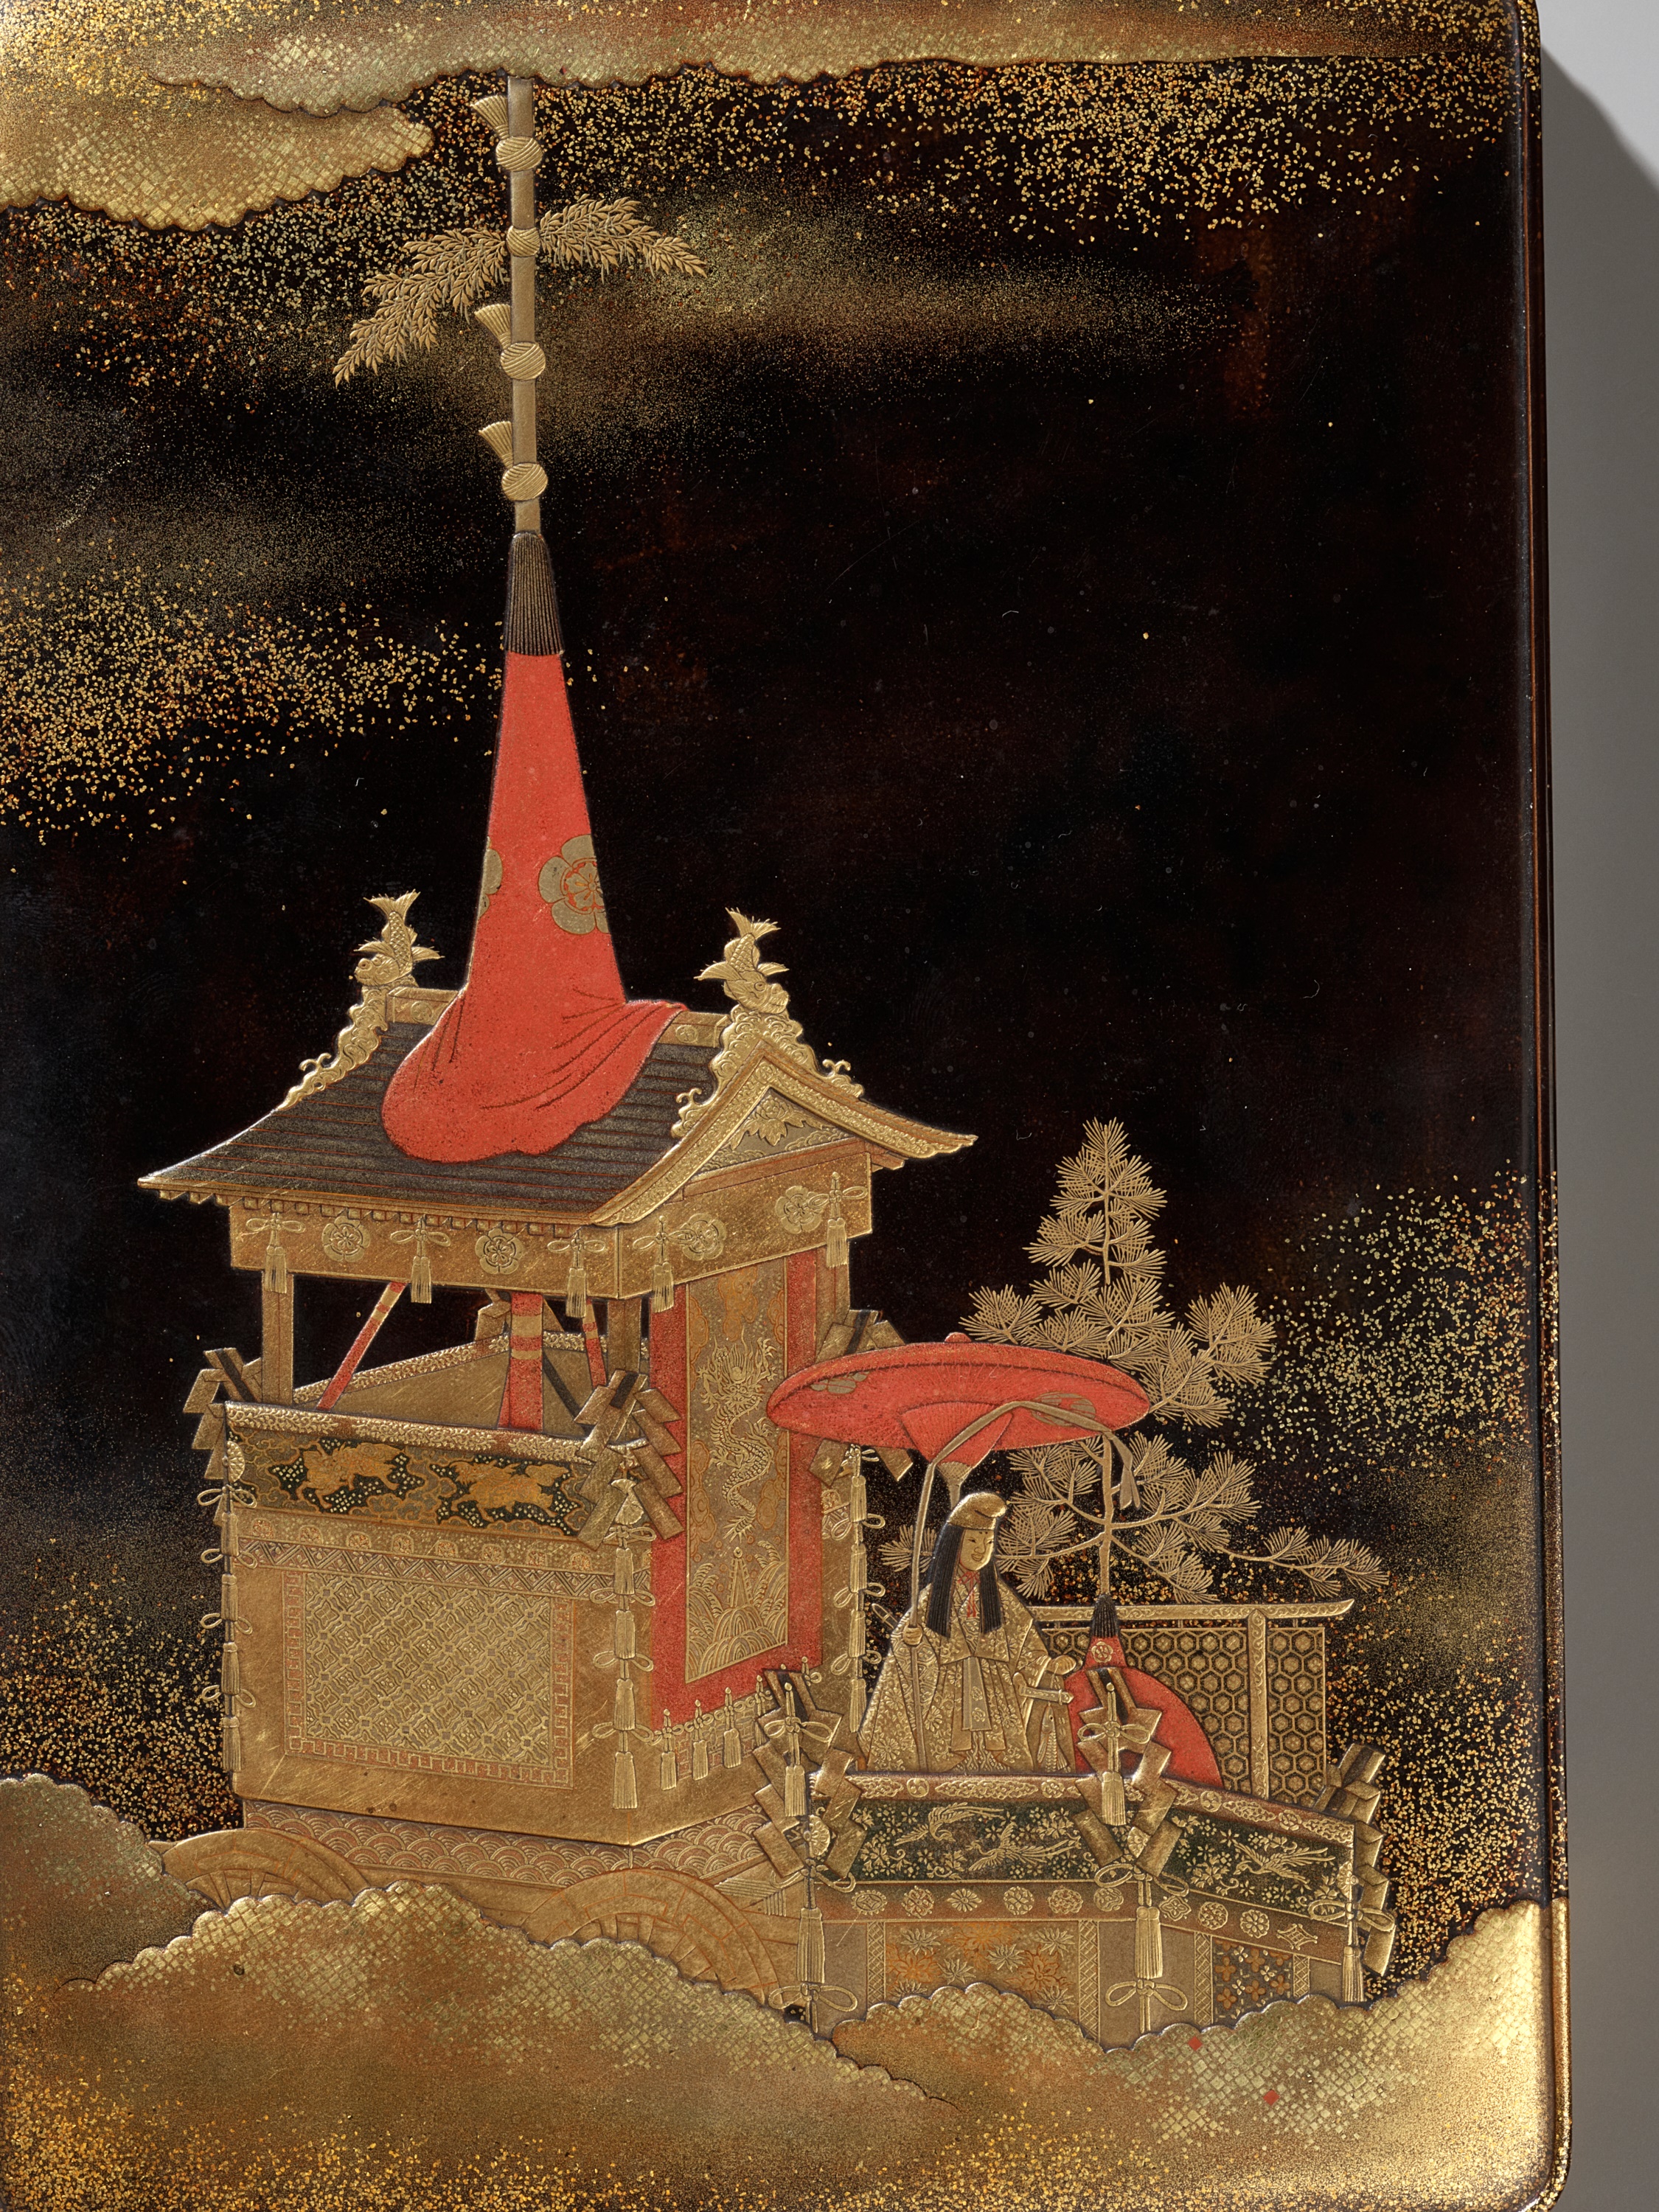 SHISEN: A MAGNIFICENT LACQUER SUZURIBAKO DEPICTING THE GION MATSURI WITH YAMABOKO FLOATS - Image 4 of 16